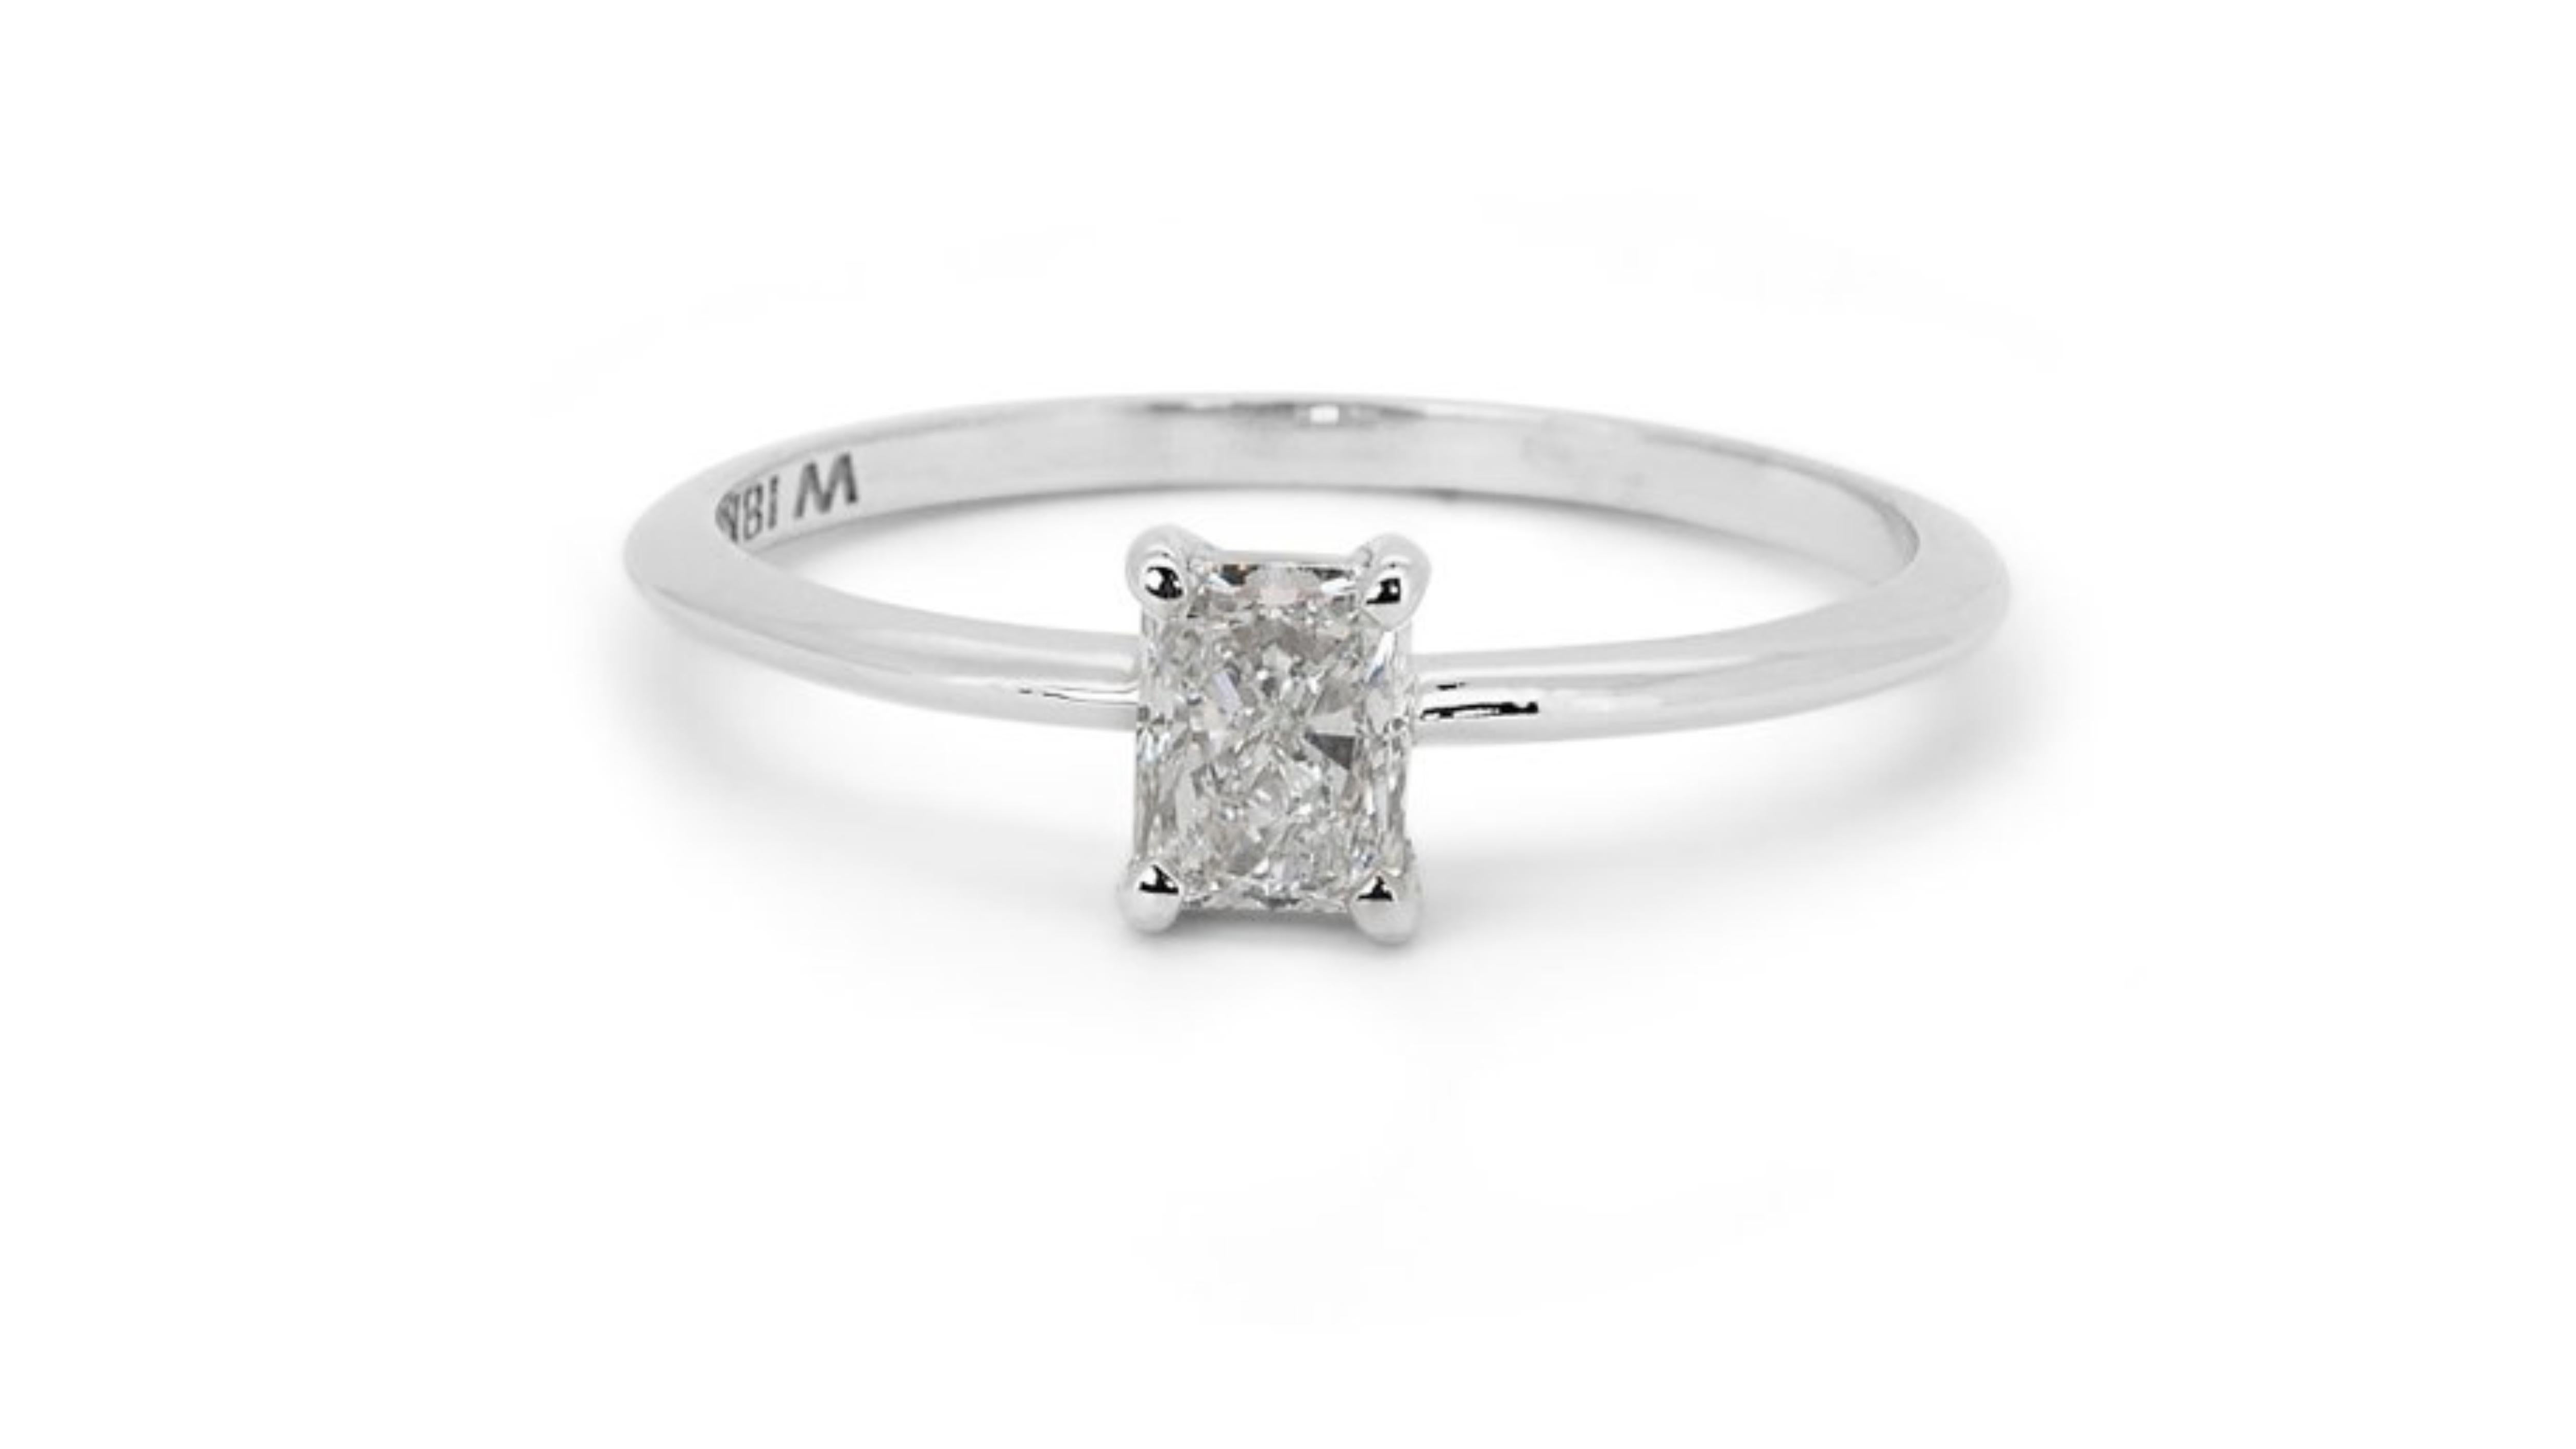 Radiant Cut Sparkling solitaire ring with a dazzling 0.80-carat radiant natural diamond